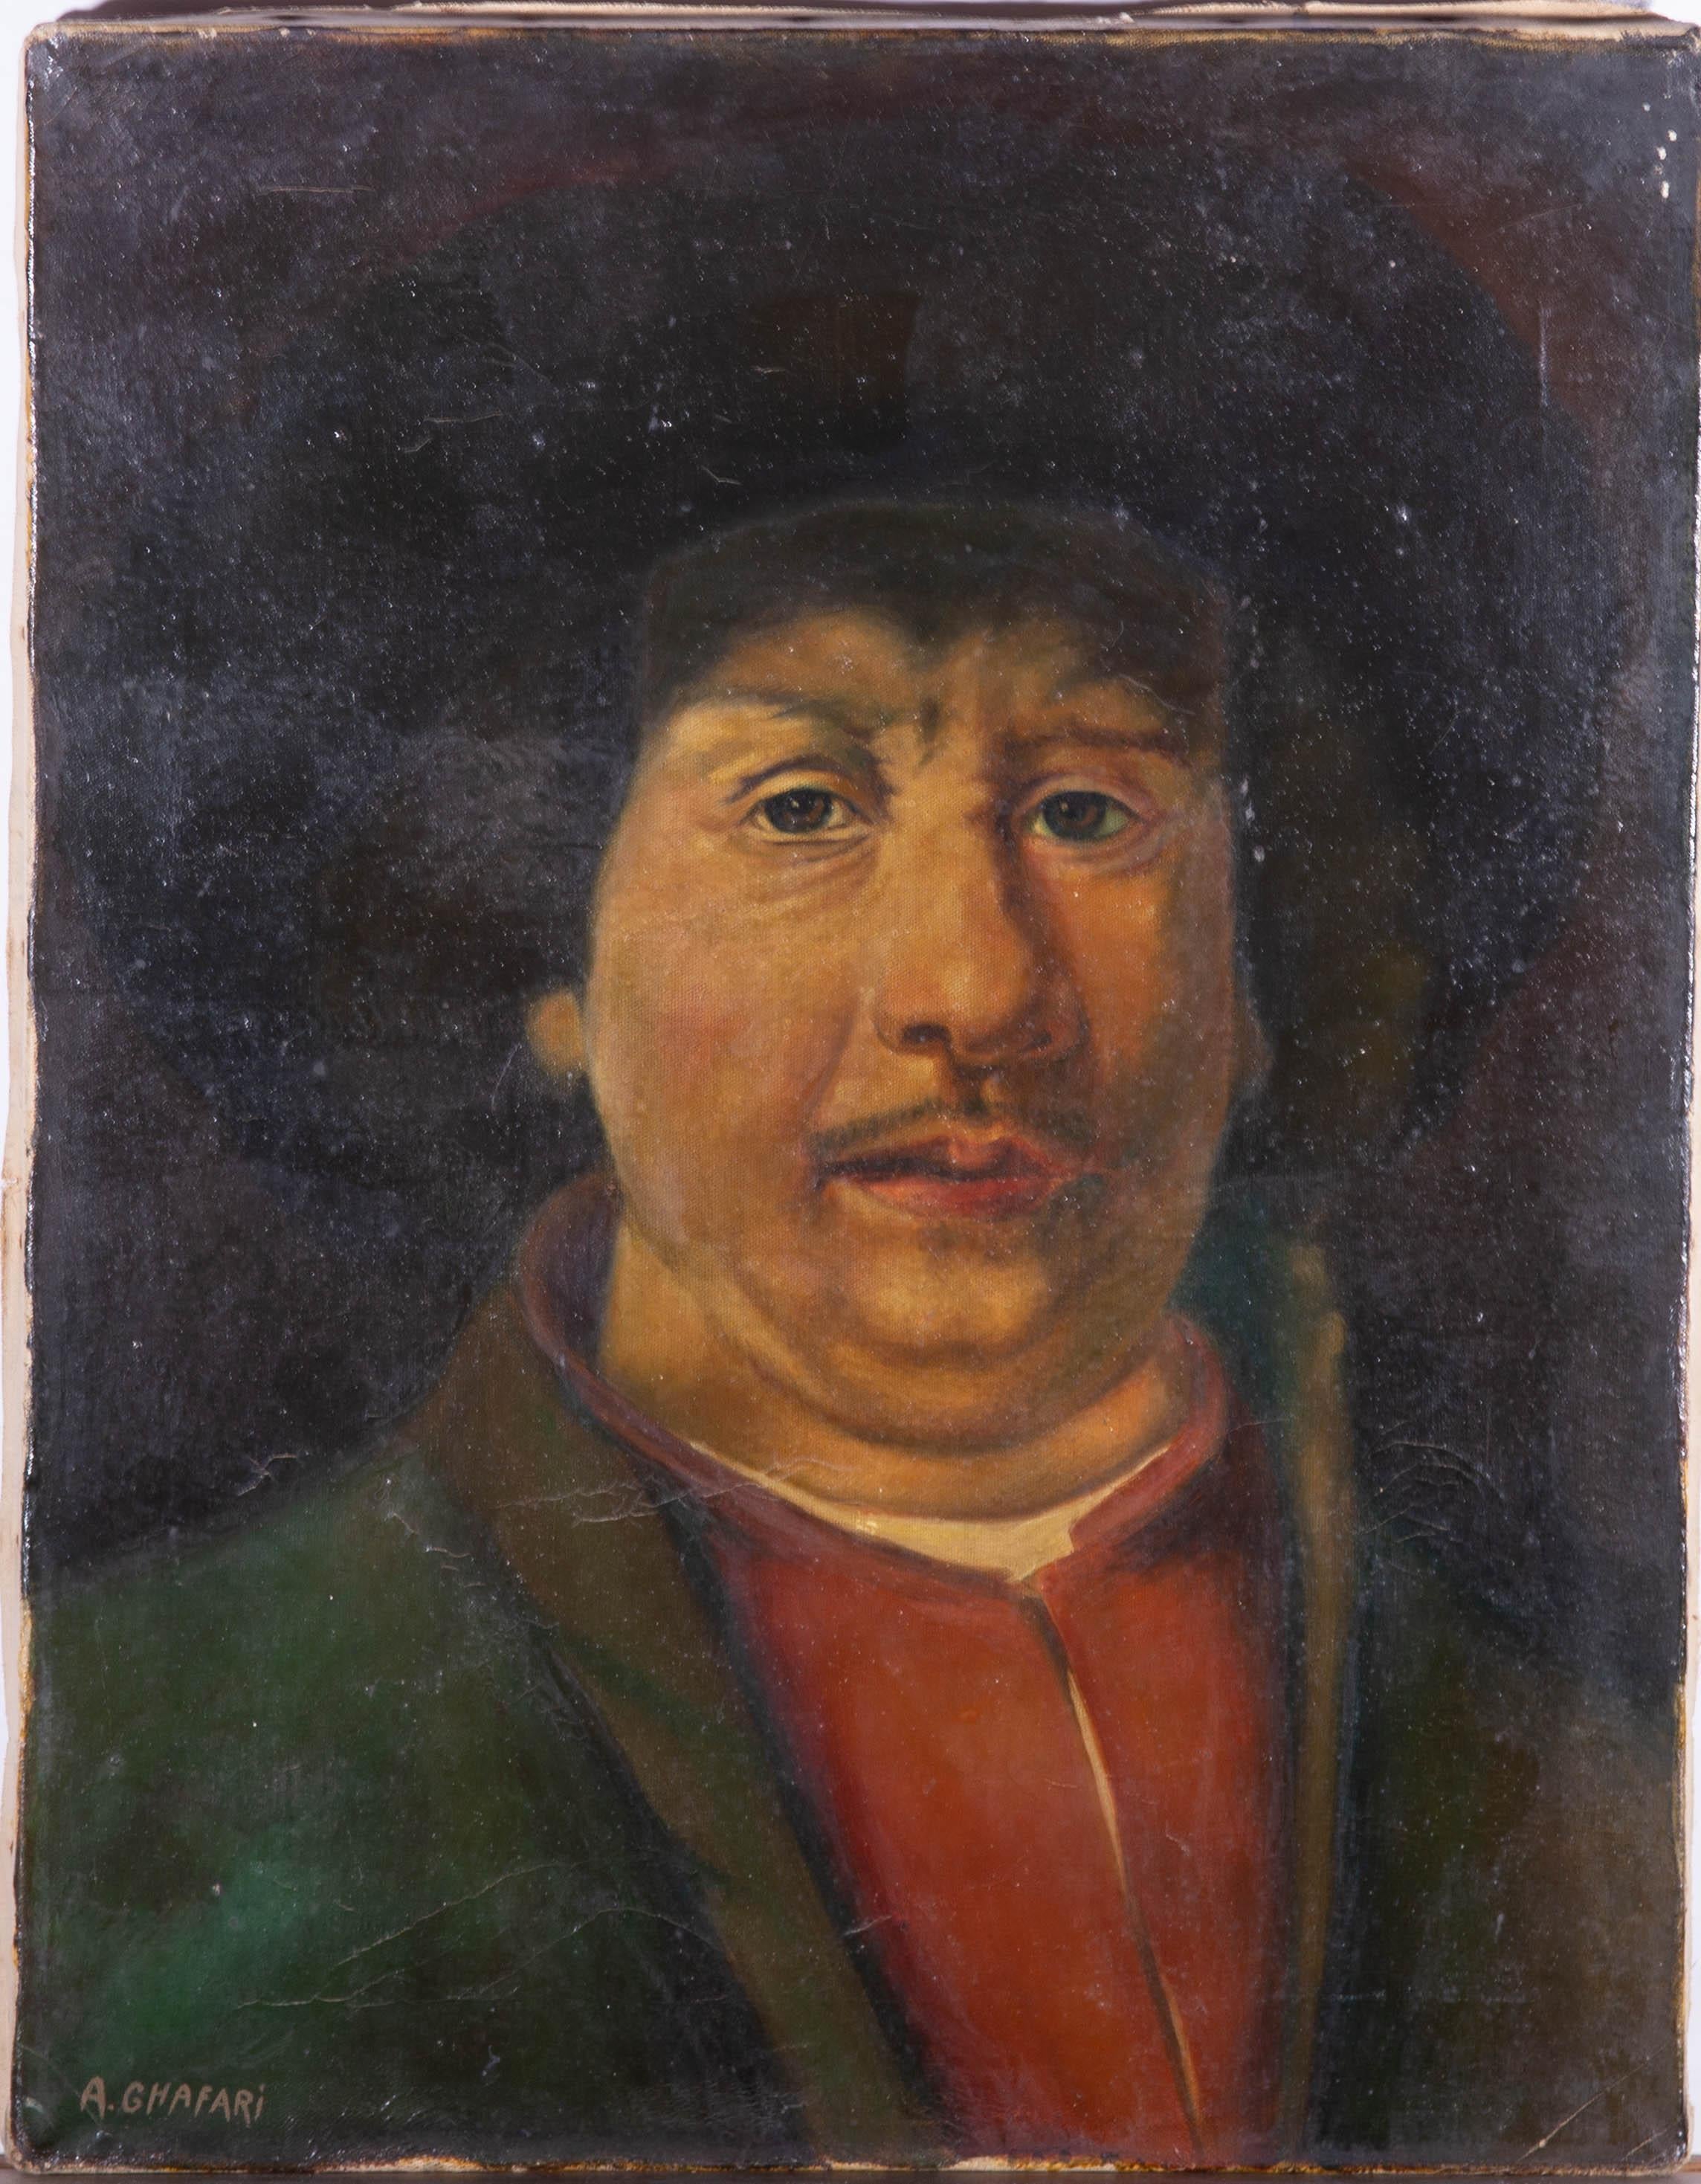 After Rembrandt - Early 20th Century Oil, Self Portrait - Painting by A. Ghafari